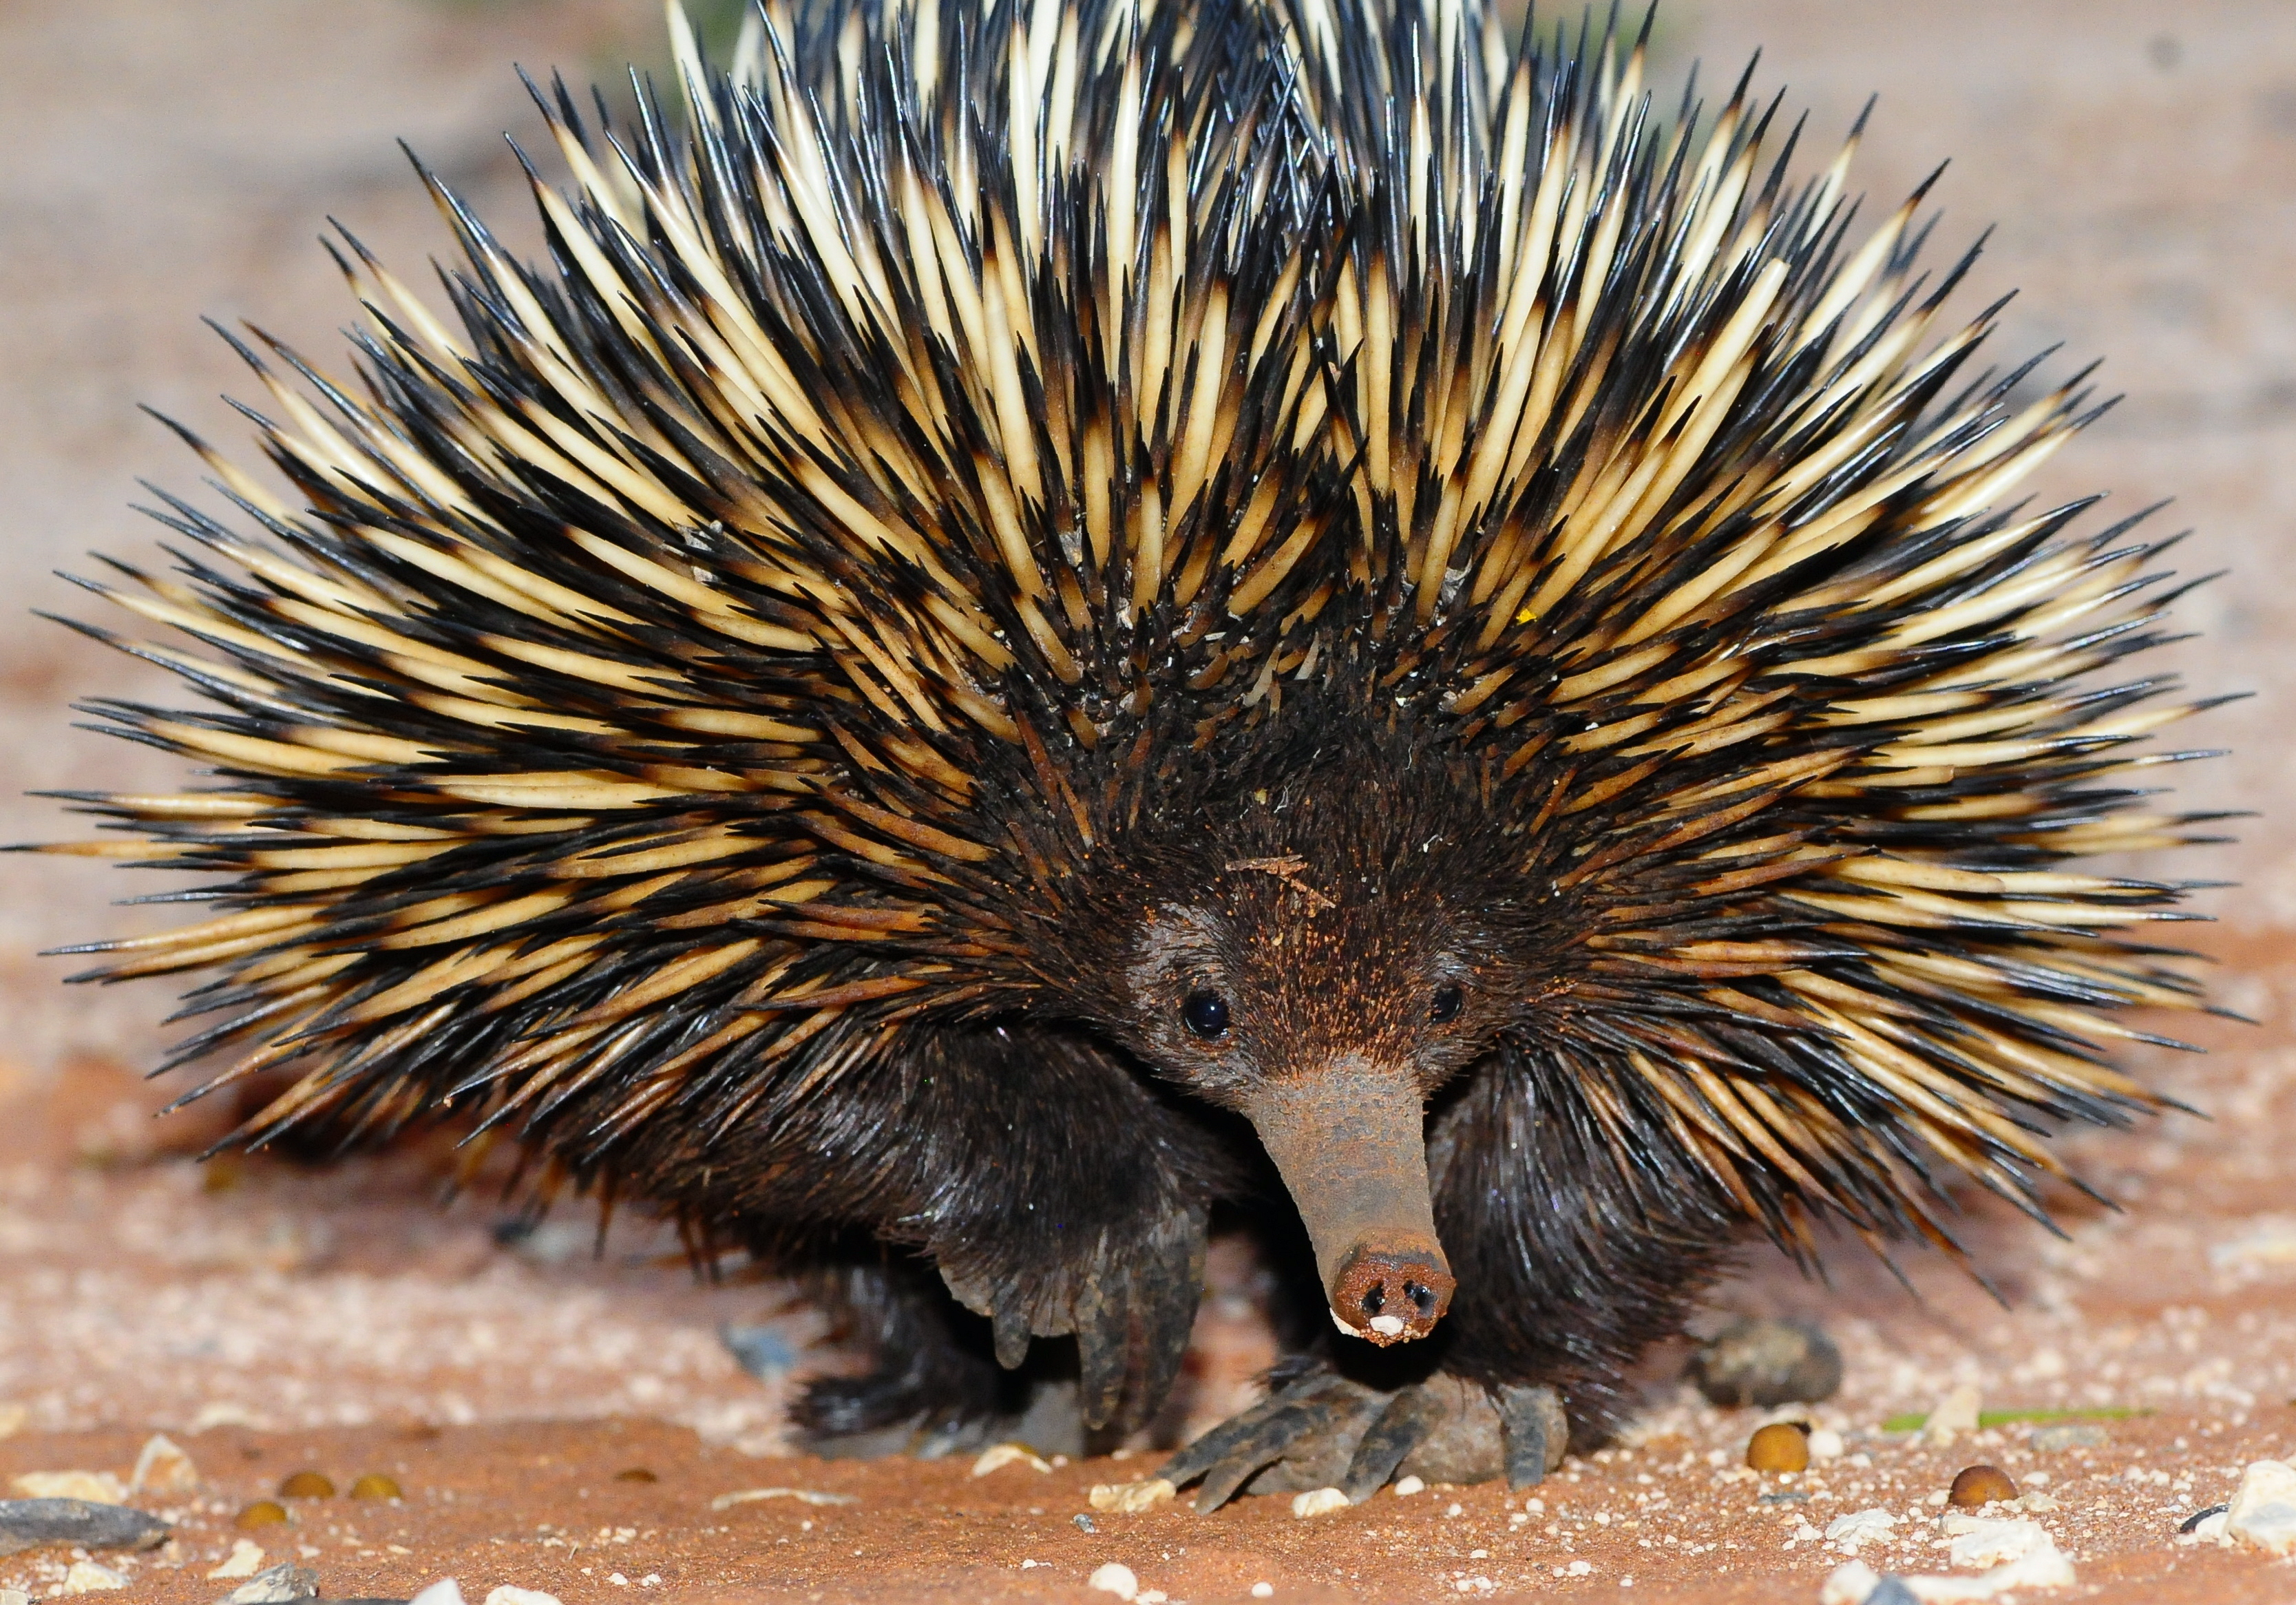 11 of the strangest animal genitals on the planet - echidnas